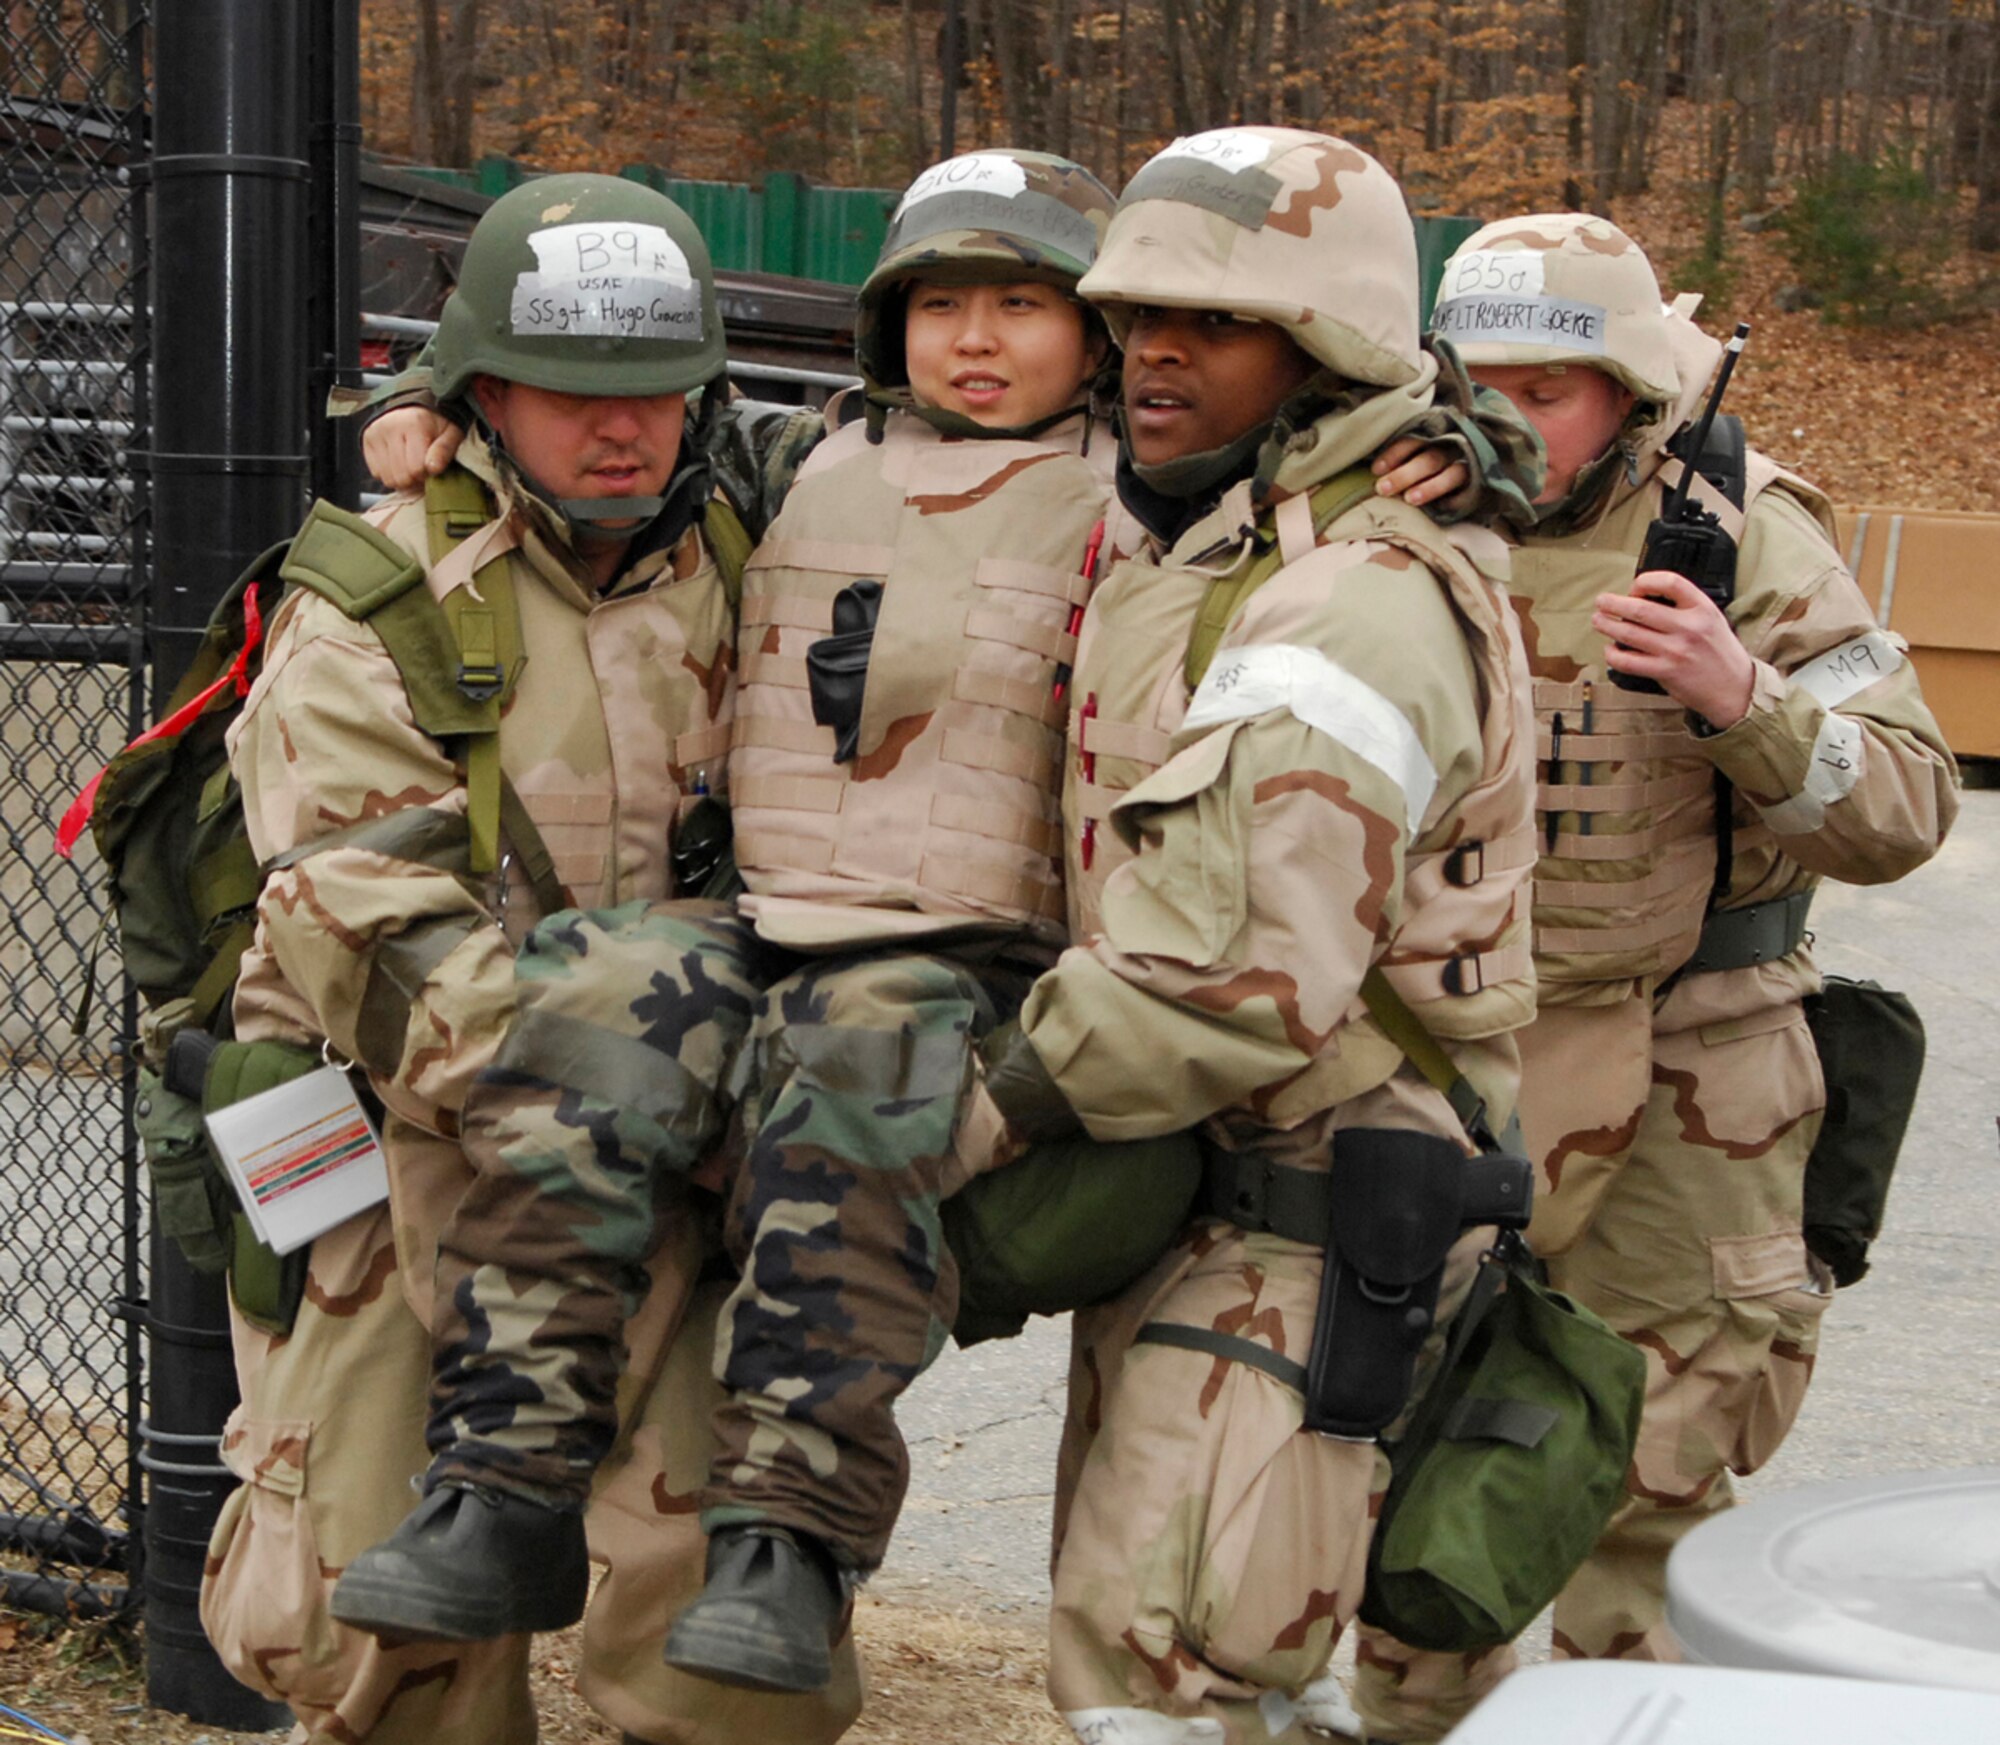 66th Comptroller Squadron members Staff Sgt. Hugo Garcia, left, and Senior Airman Keenan Gunter, right, carry Senior Airman Yunji Harris, 66th CPTS, who was designated as a Self-Aid and Buddy Care 'victim' during the March Base Readiness Exercise. Approximately 140 Airmen "deployed" to Camp Patriot to demonstrate their ability to survive and operate in a field environment. (U.S. Air Force Photo by Mark Wyatt)